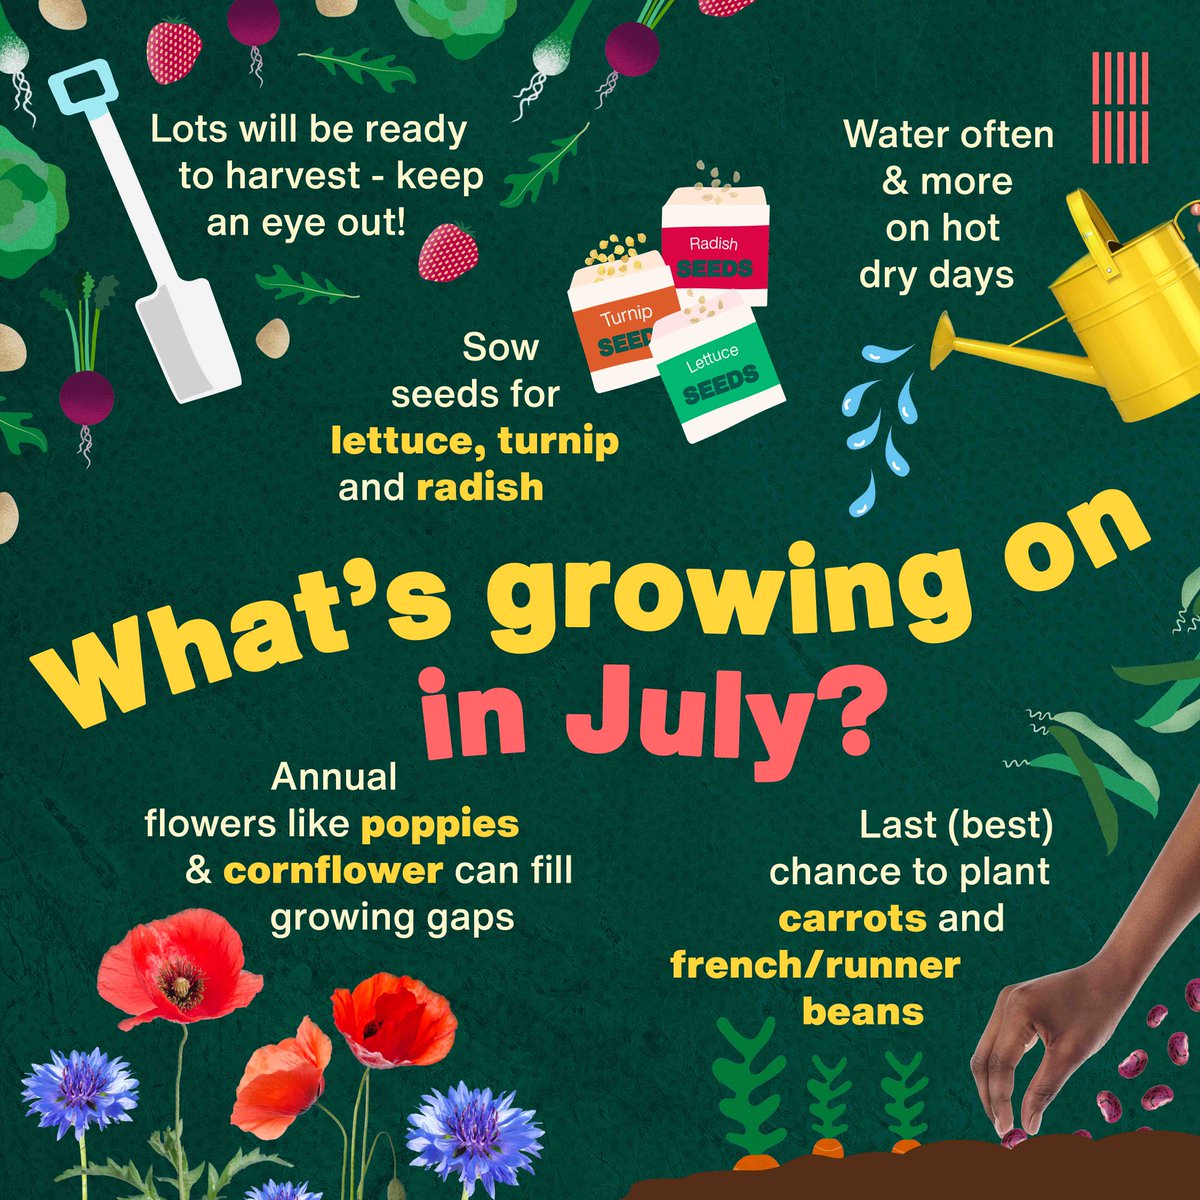 Some tips to start planting (and keep existing plants happy) in July 🌱 #WhatsGrowingOn